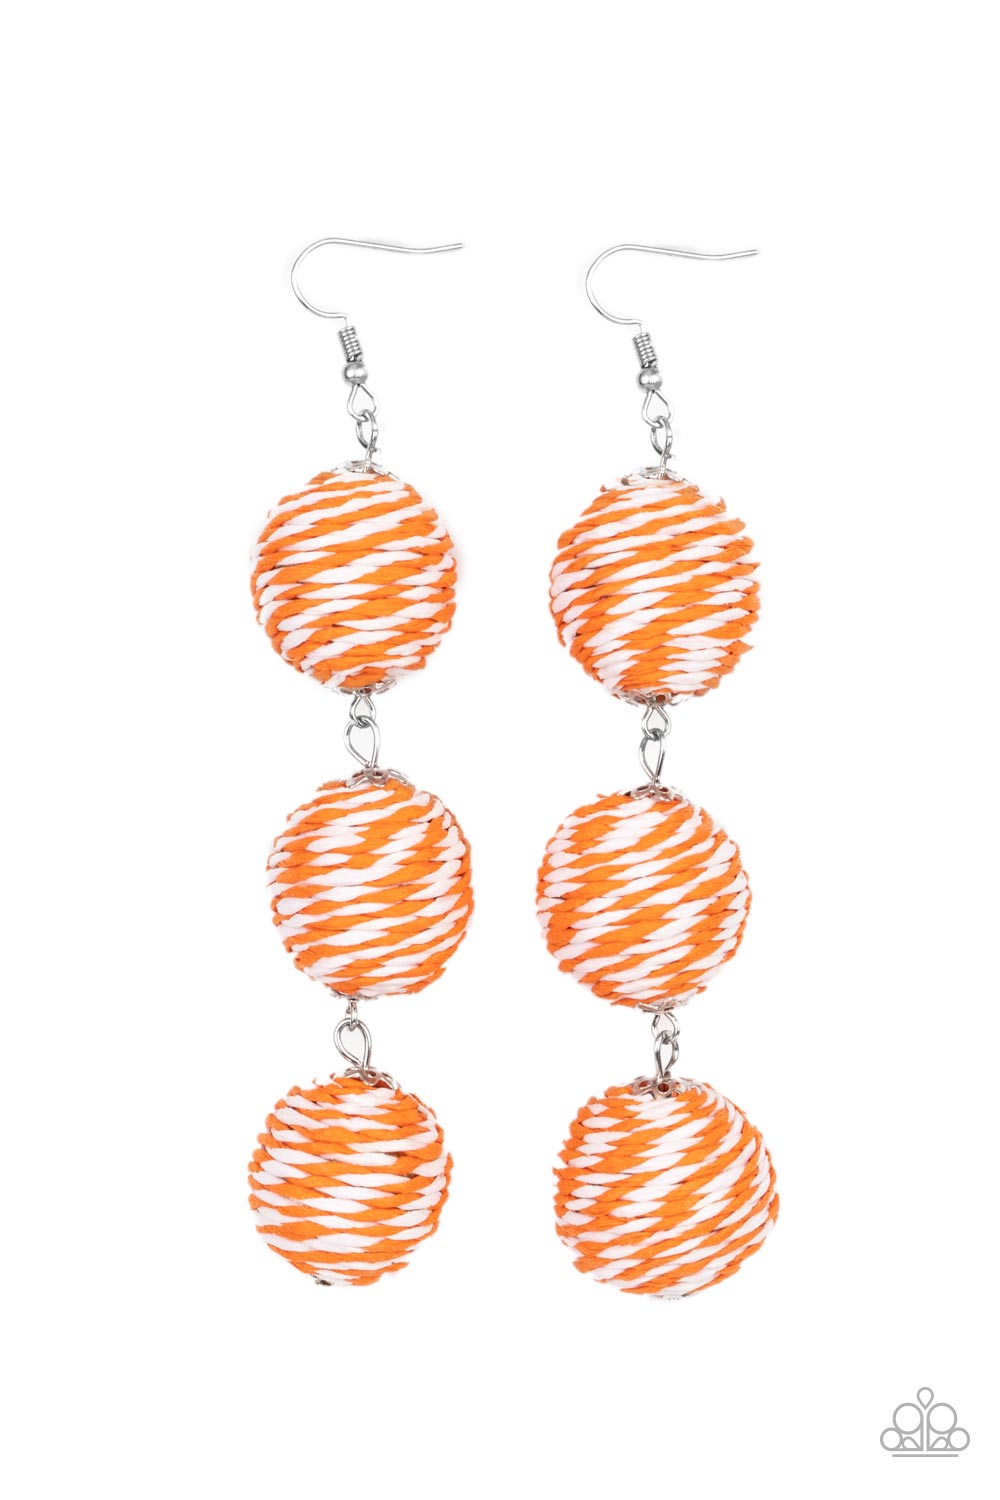 Laguna Lanterns Orange Earring - Paparazzi Accessories  A woven collection of orange and white crepe-like strings ornately wraps around three hanging beads, reminiscent of decorative party lanterns. Earring attaches to a standard fishhook fitting.  Sold as one pair of earrings.